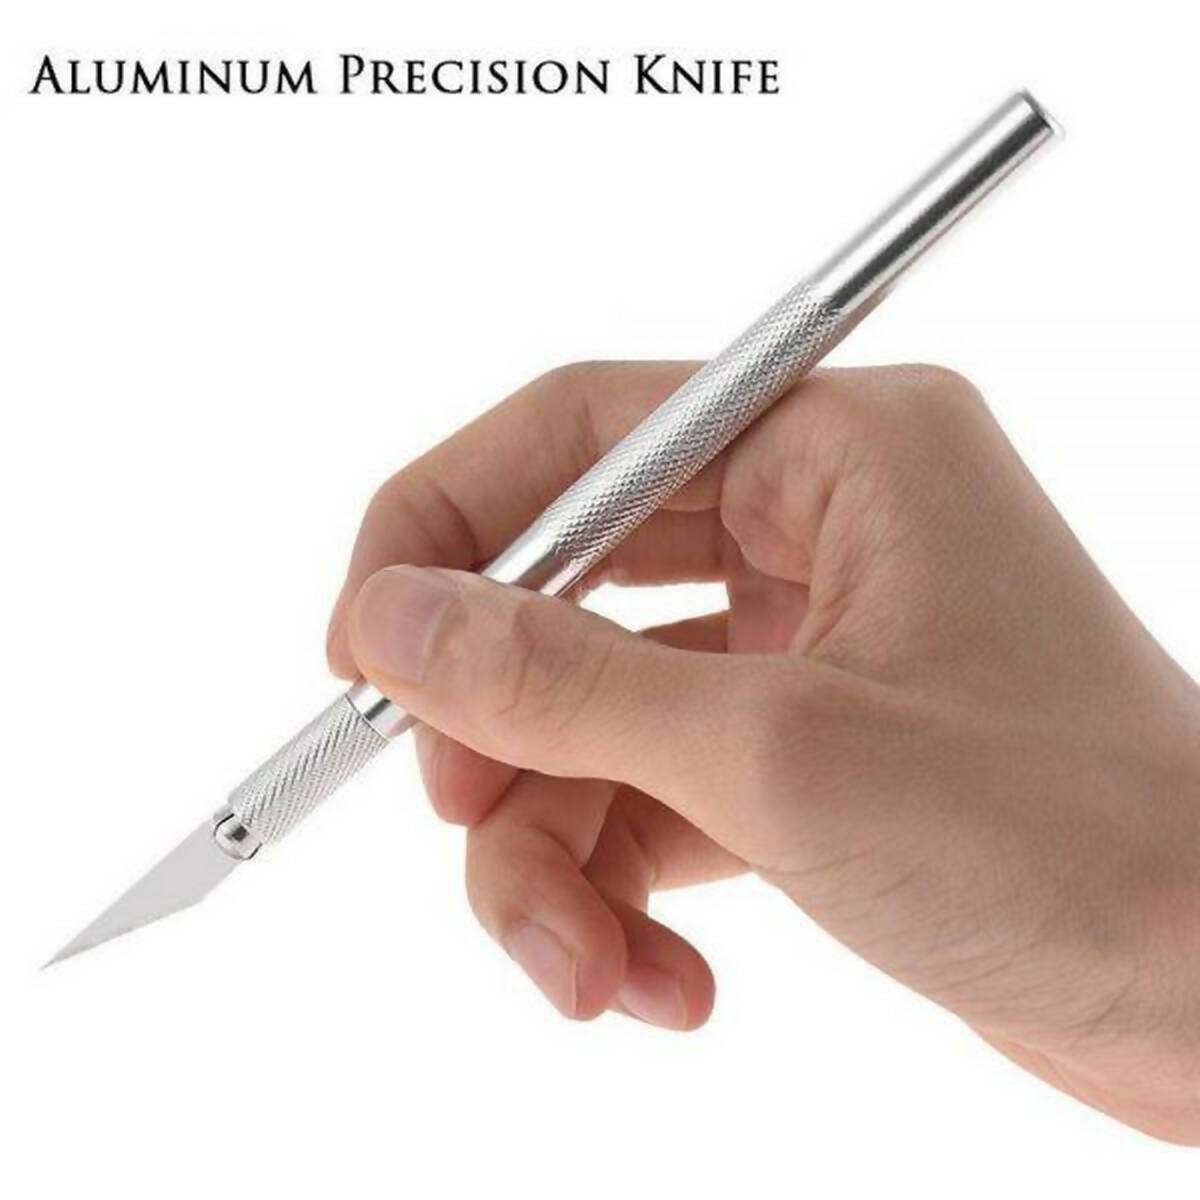 Metal Precision Paper Cutting Cutter Art Knife Tool For Craft Set Model Making Carving Scoring Pen Type Knife With 6 Blades For Diy Creator And Artist Tool